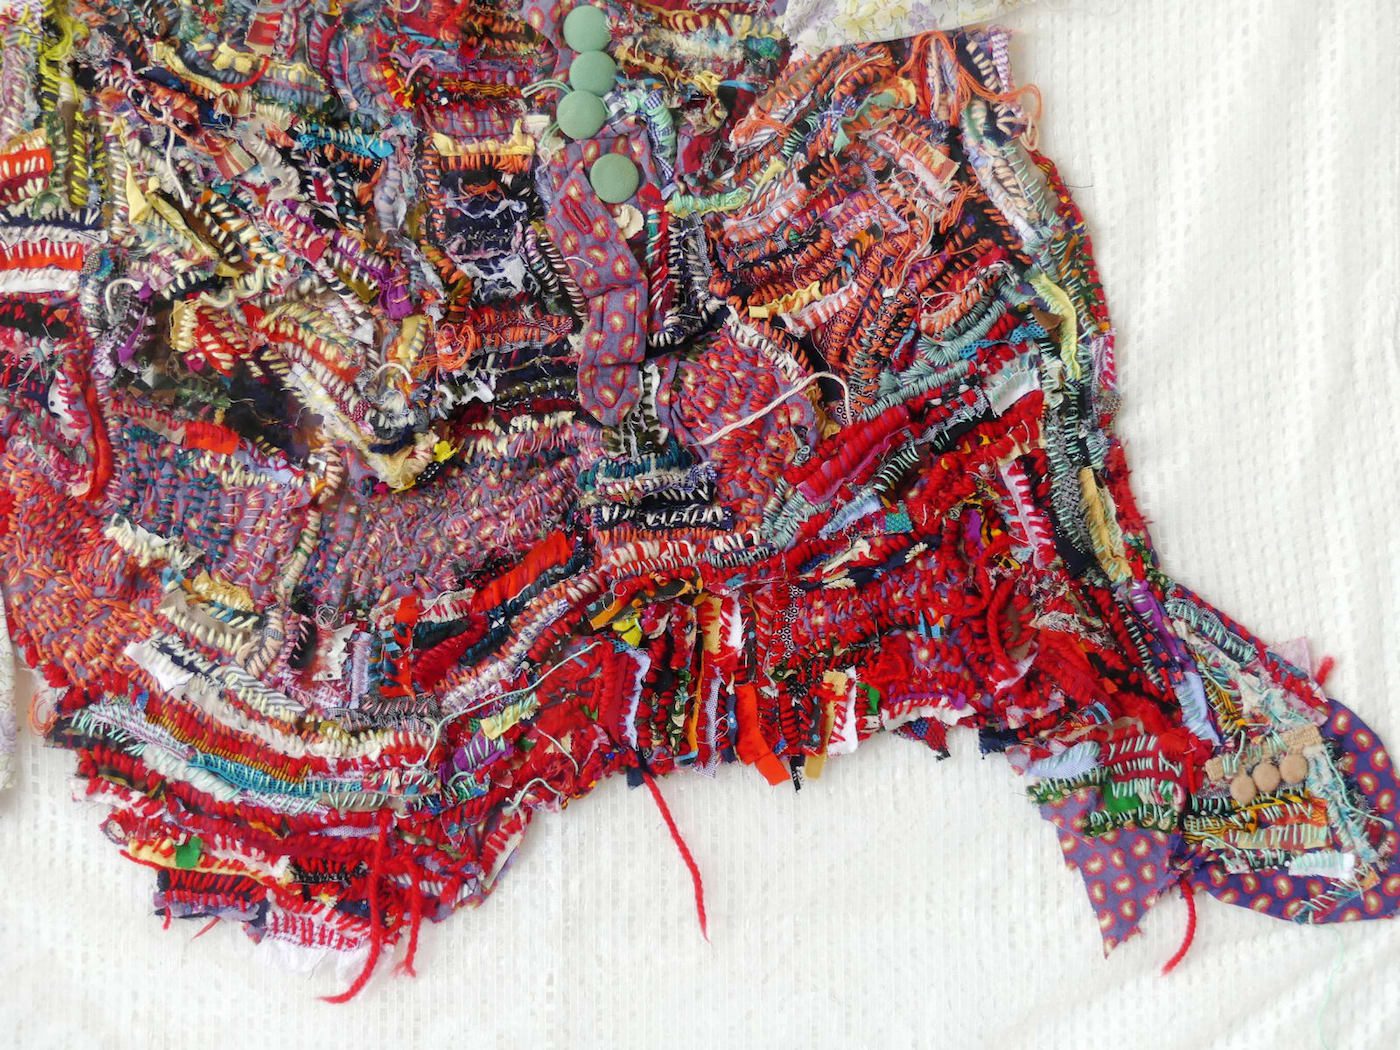 Georgina Maxim, Ma Mére II (Detail), 2018. Mixed media textile. Copyright the artist and Sulger-Beul Gallery.
